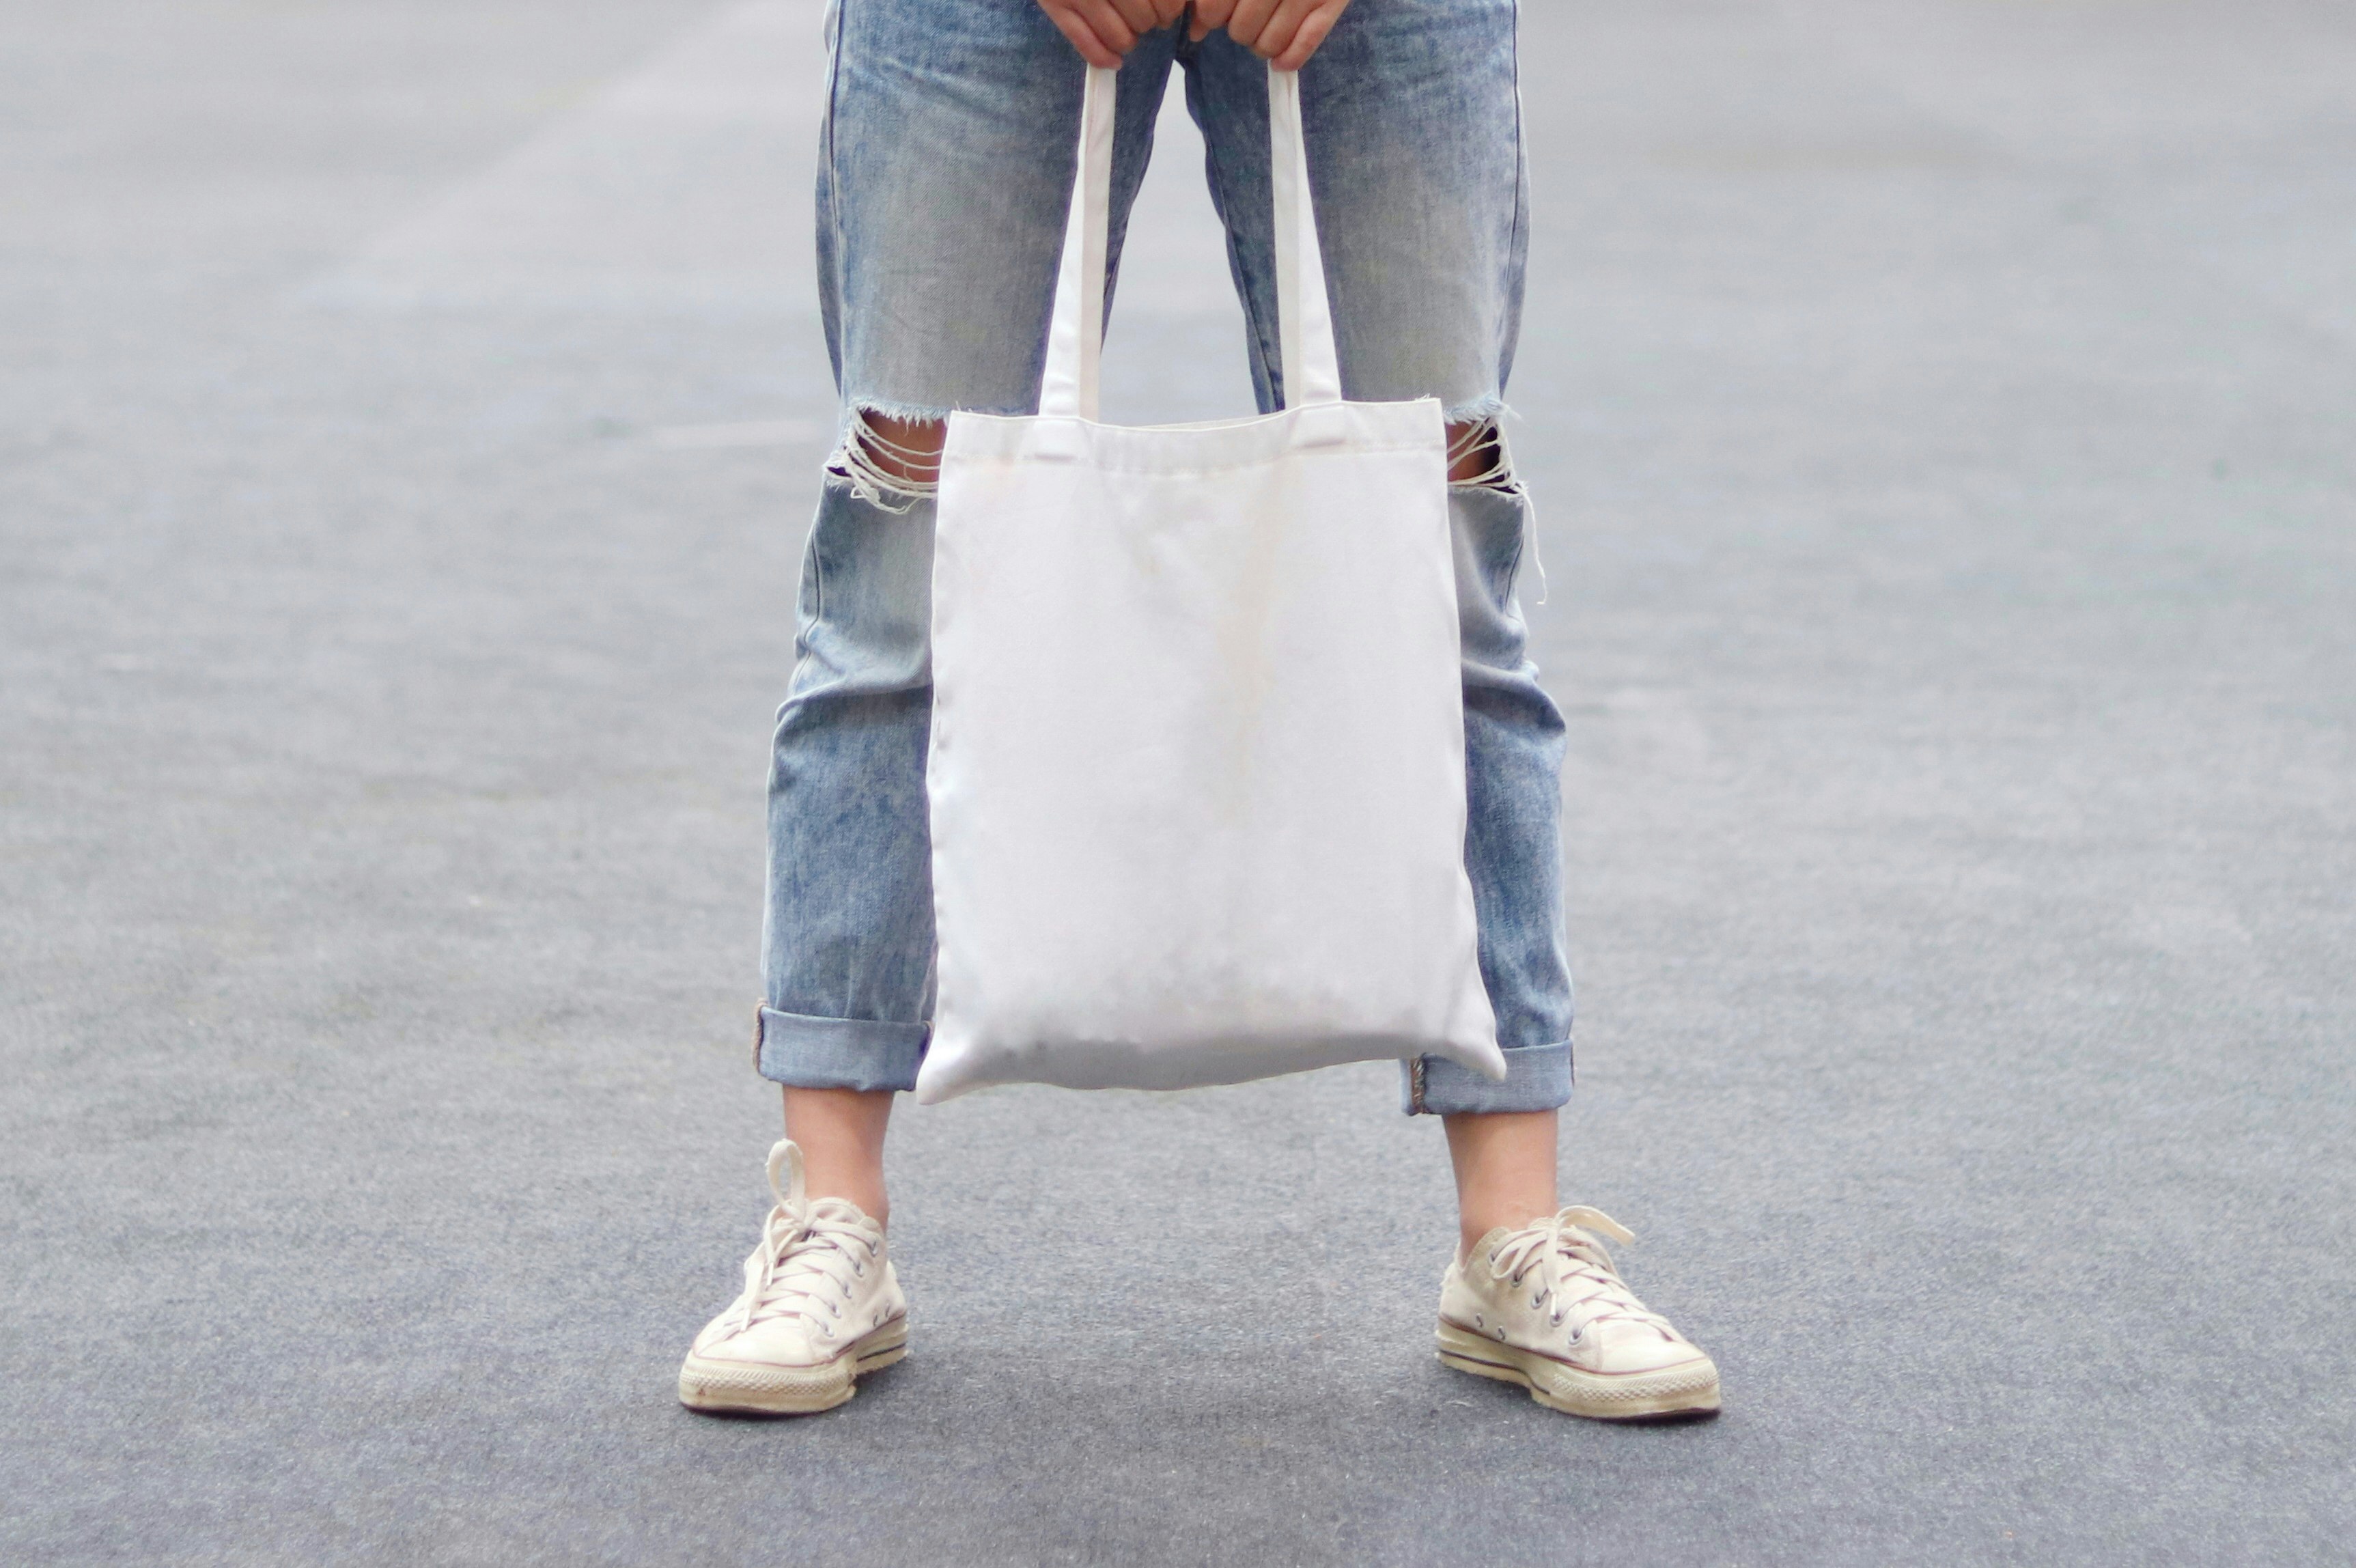 A woman wearing ripped jeans holds a white tote bag.